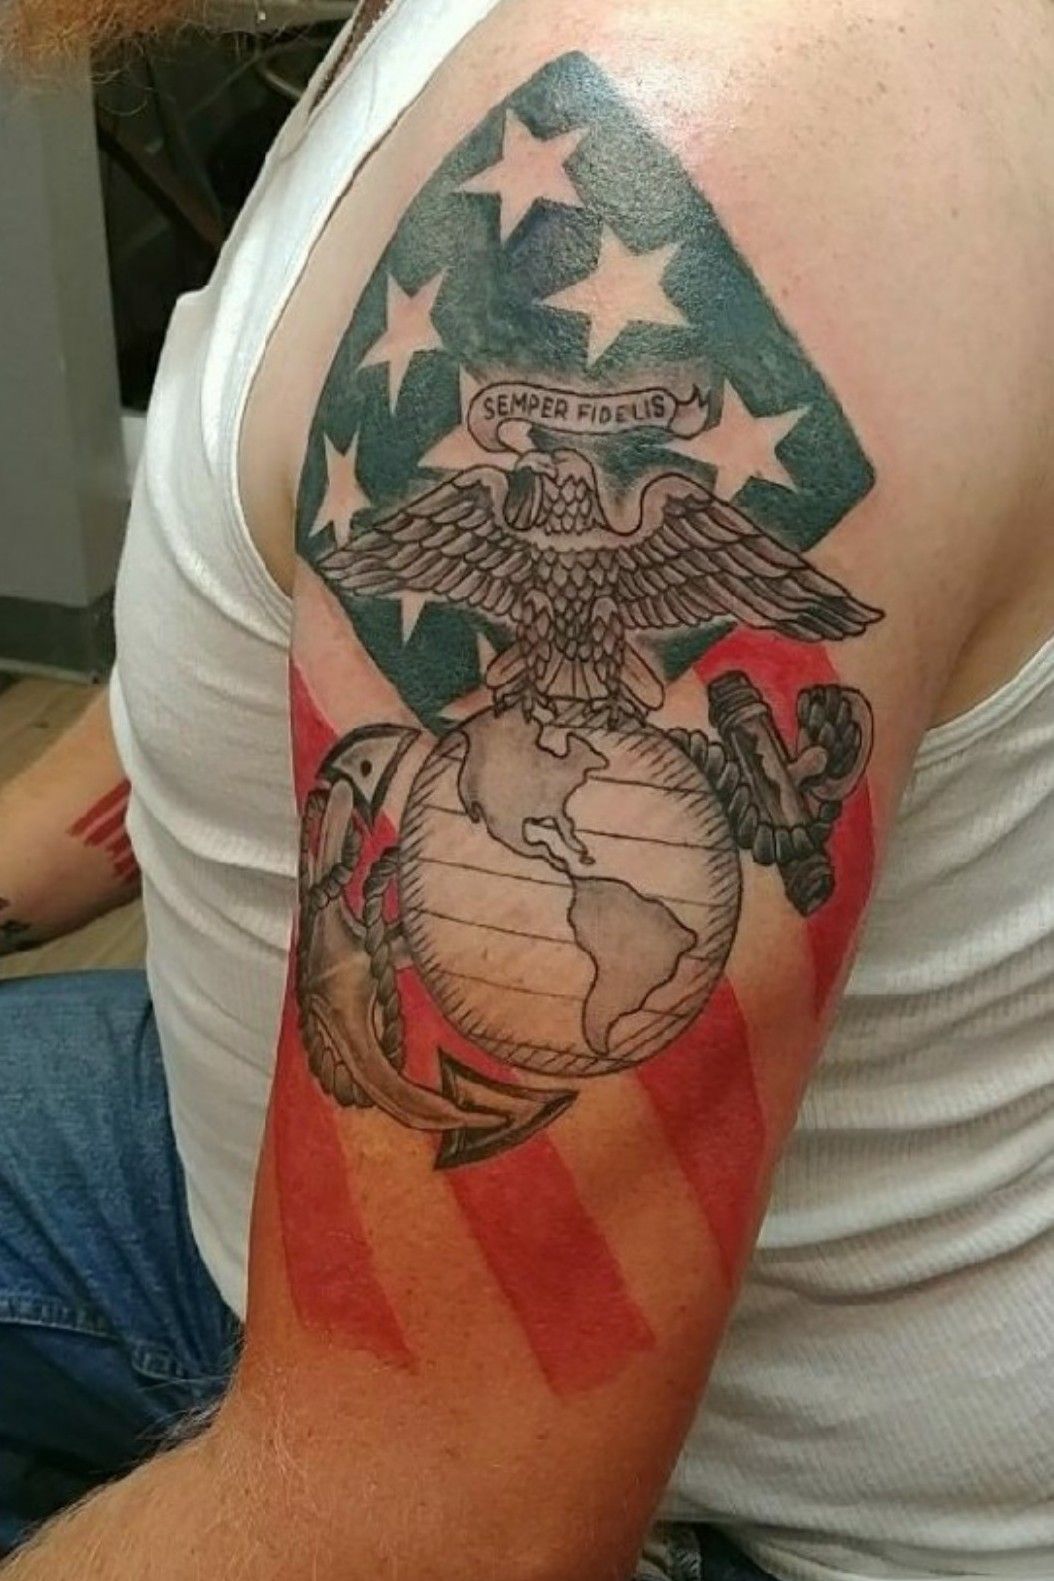 Forever Stained Tattoo  Well Cristian did this halfway okay tattoo of an eagle  globe anchor marine half sleeve I guess if like half ass tattoos follow  tattoosbycristian  PS if you